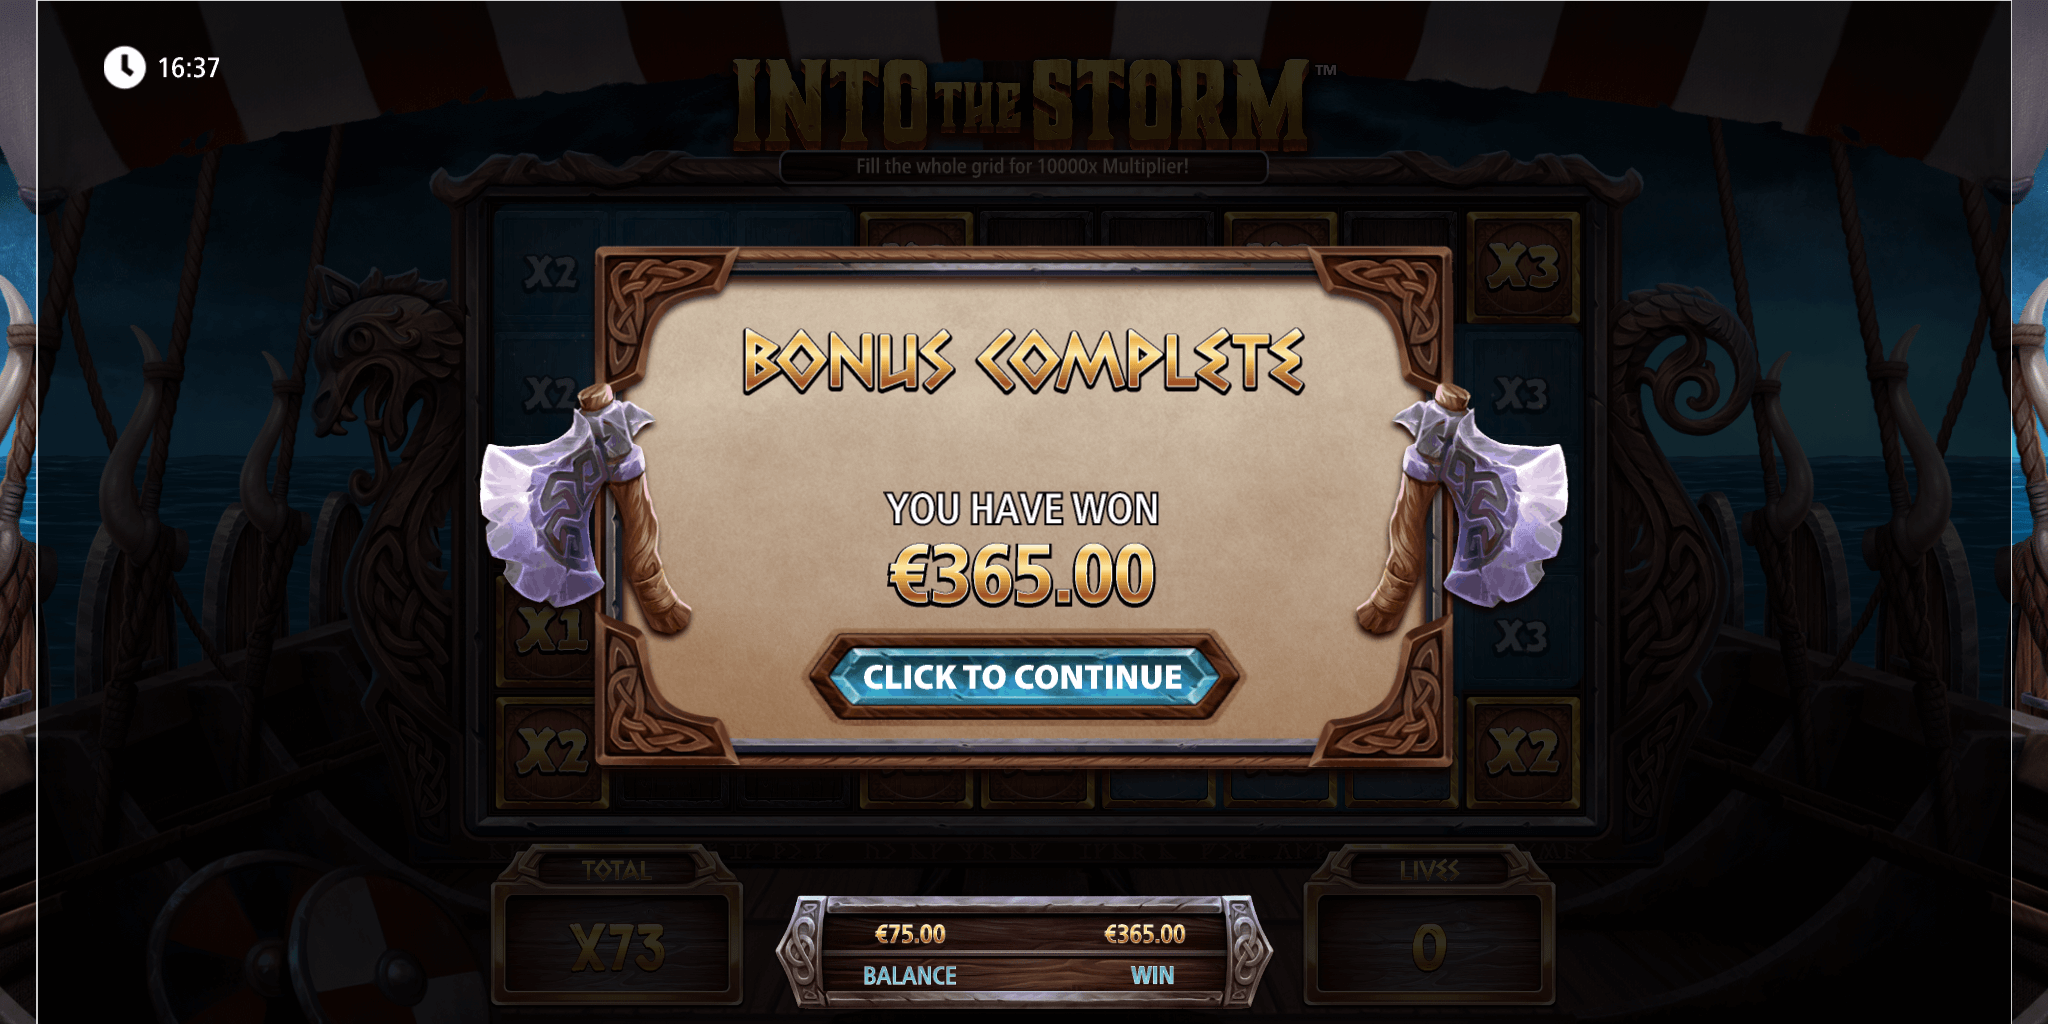 Into The Storm slot